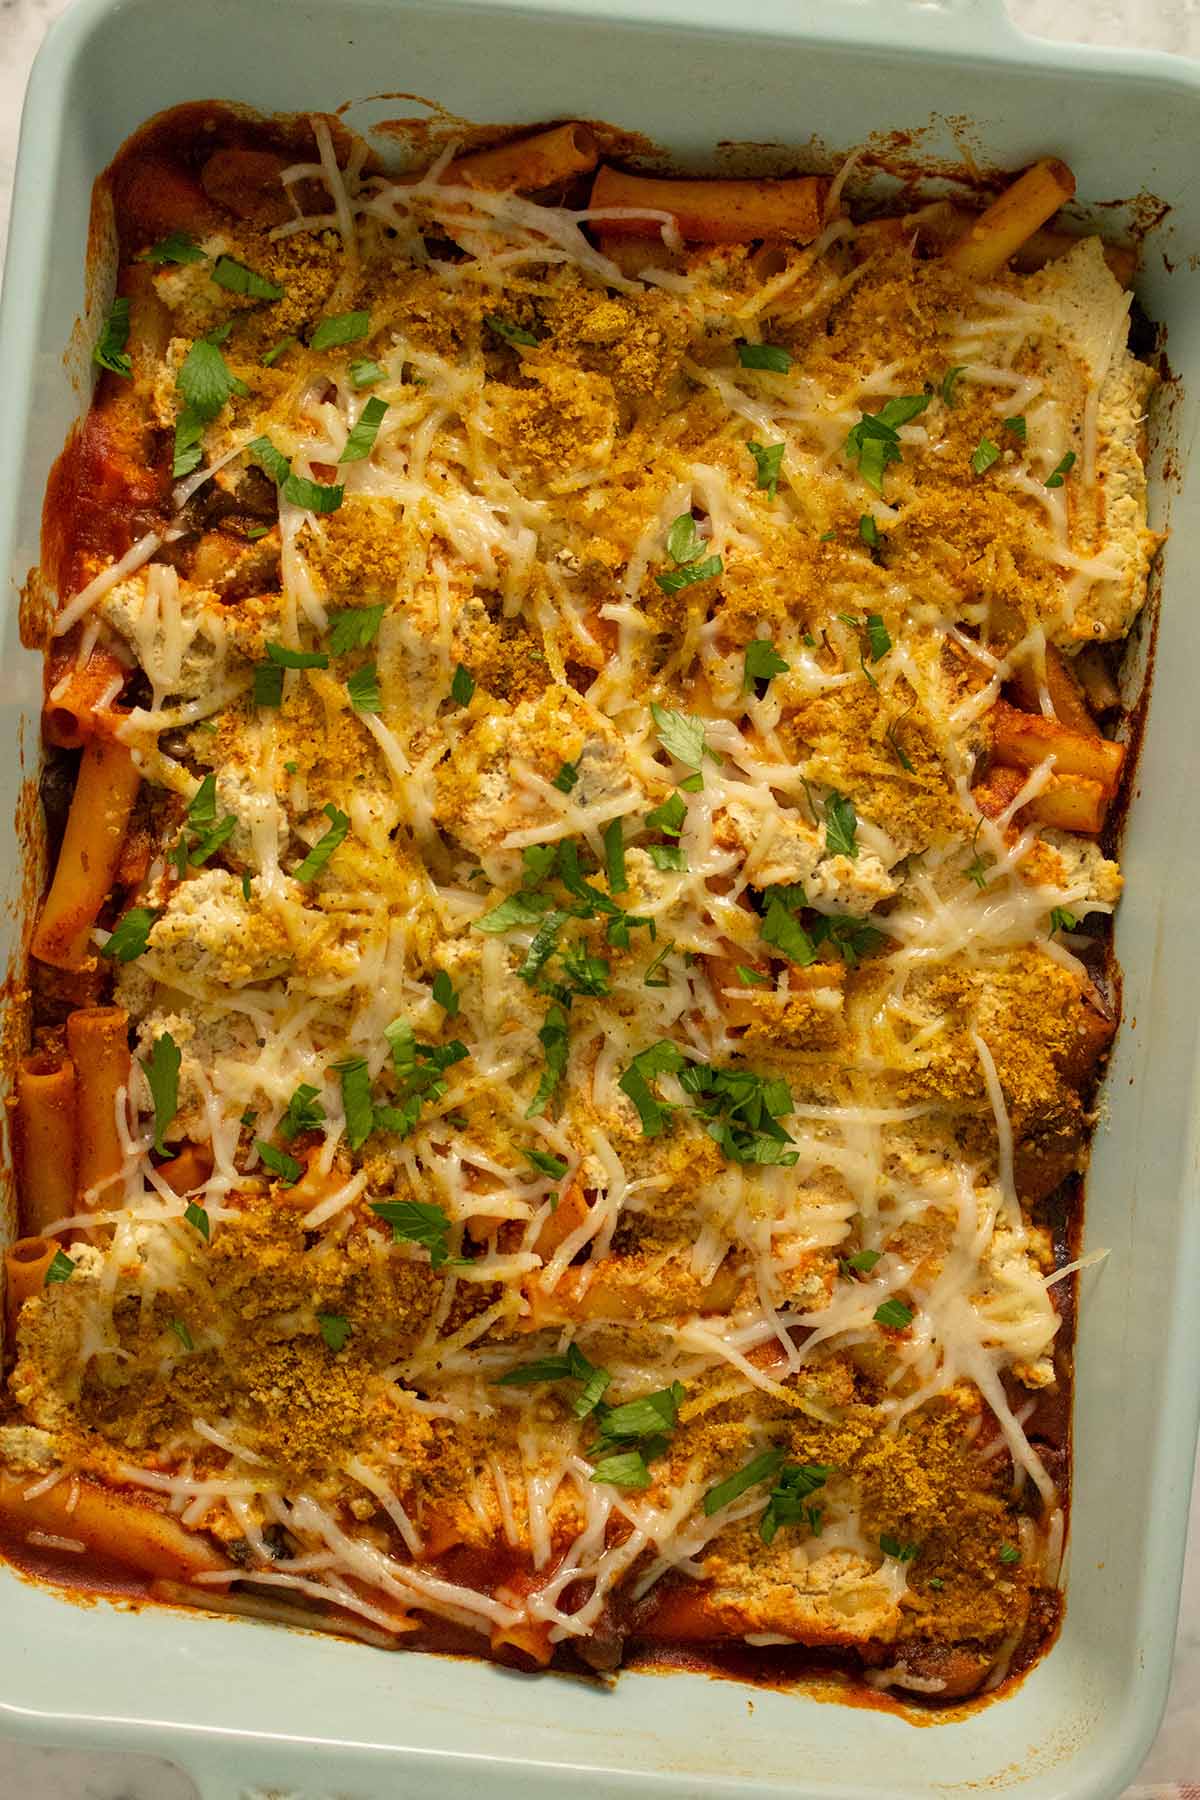 vegan baked ziti fresh out of the oven with parsley sprinkled on top